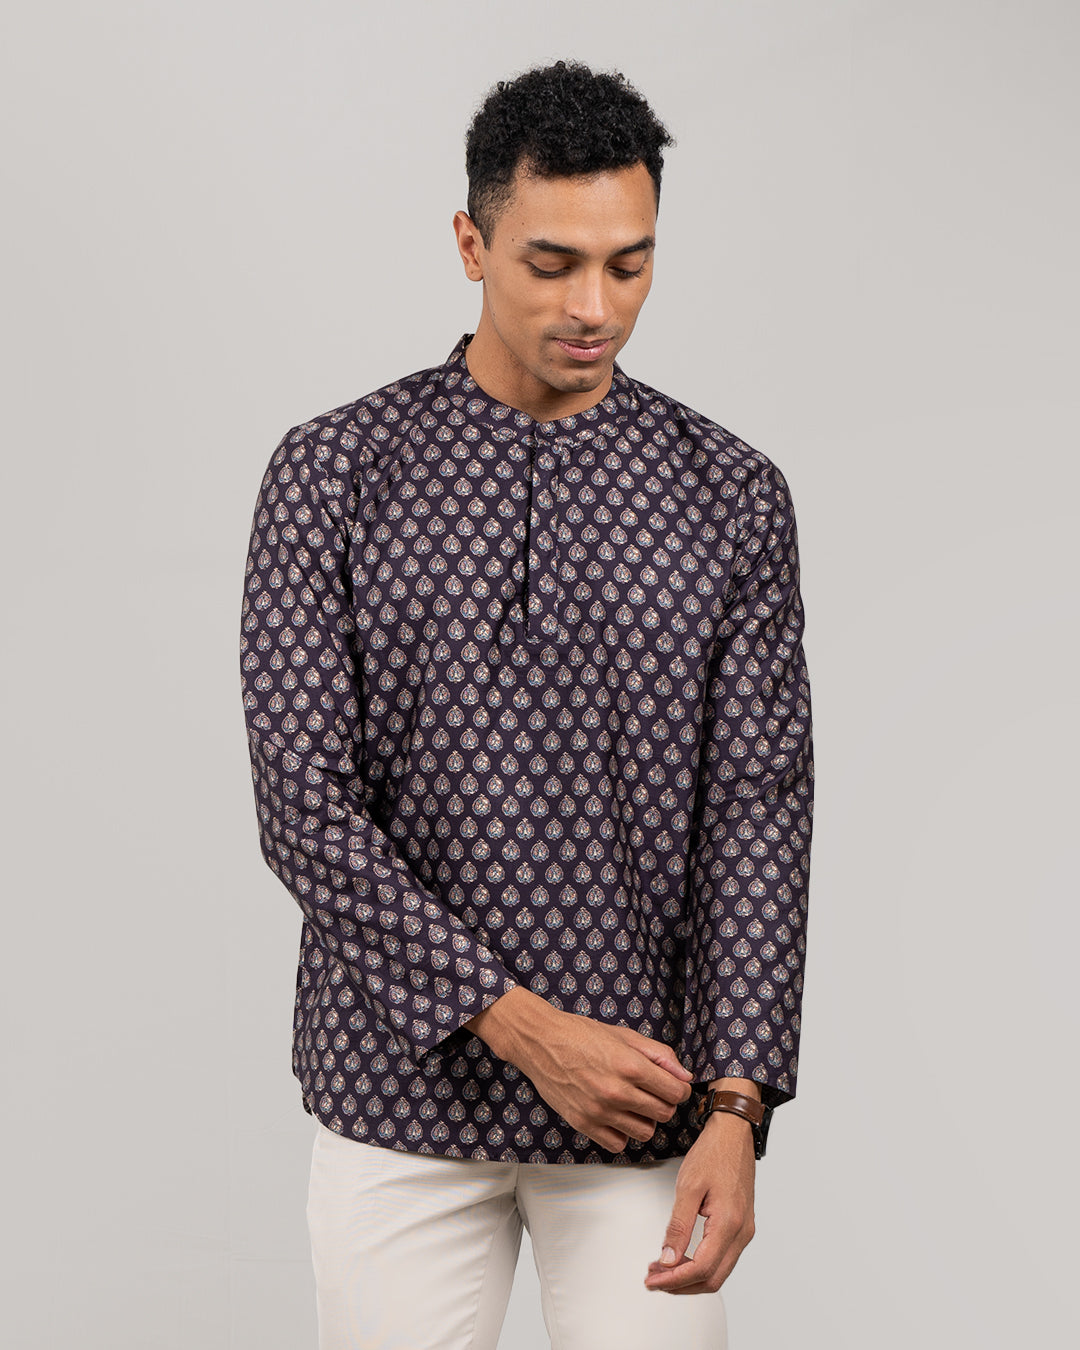 Comfortable traditional short kurta for men, ideal for casual and festive wear.